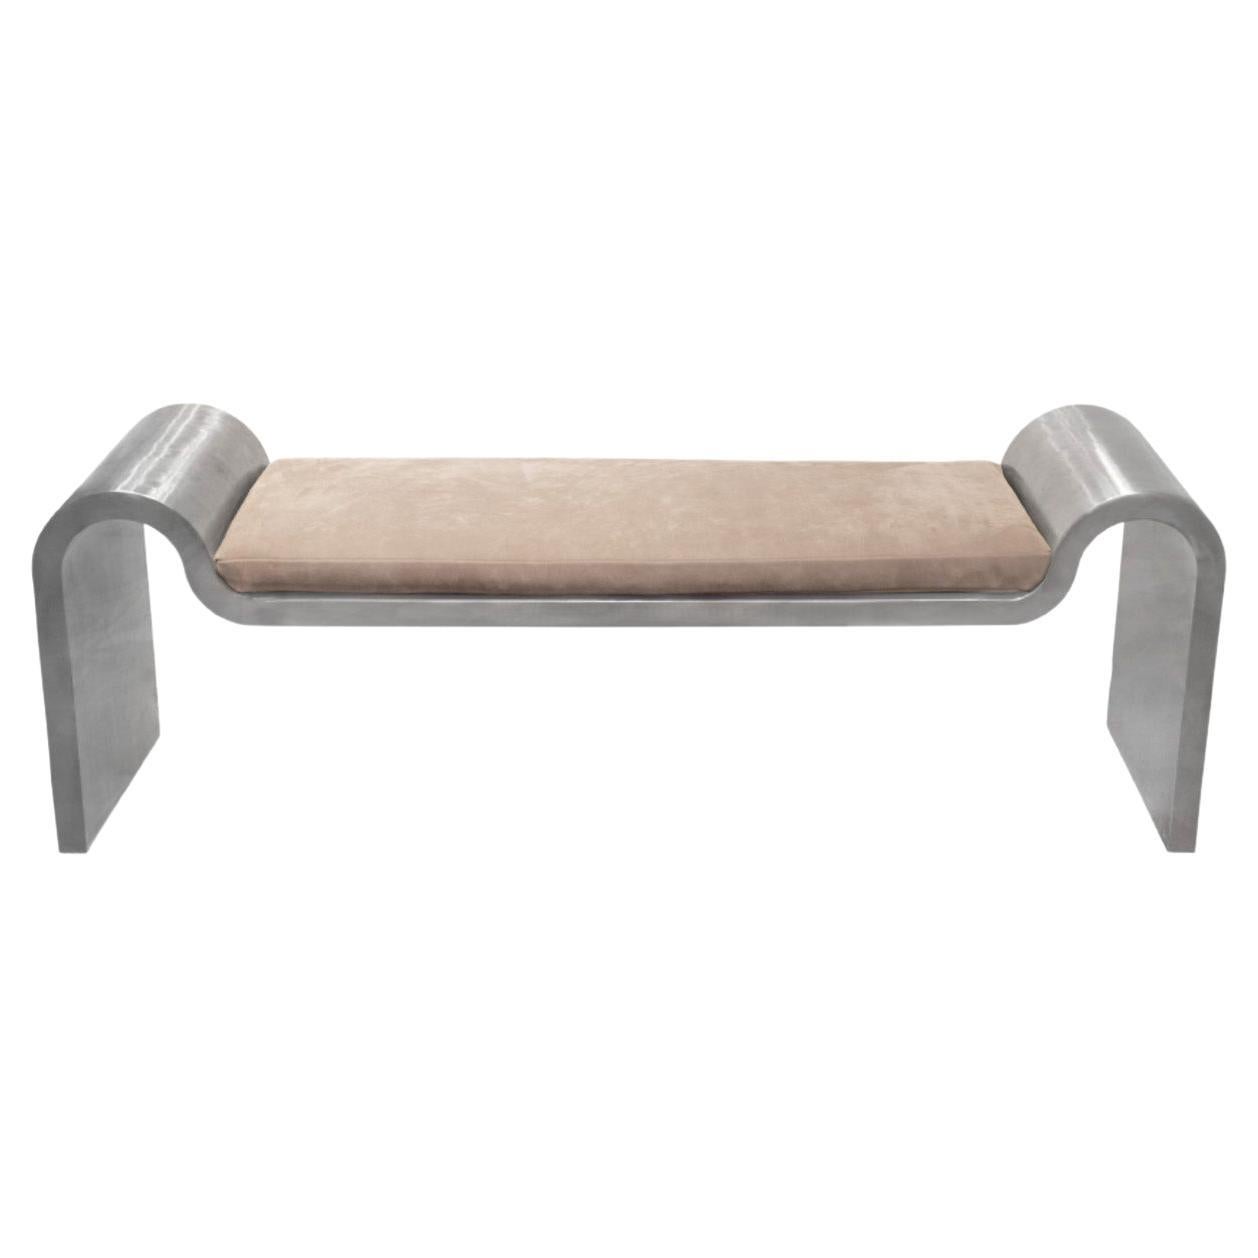 Karl Springer Sculptural Bench in Stainless Steel with Suede Seat Cushion, 1980s